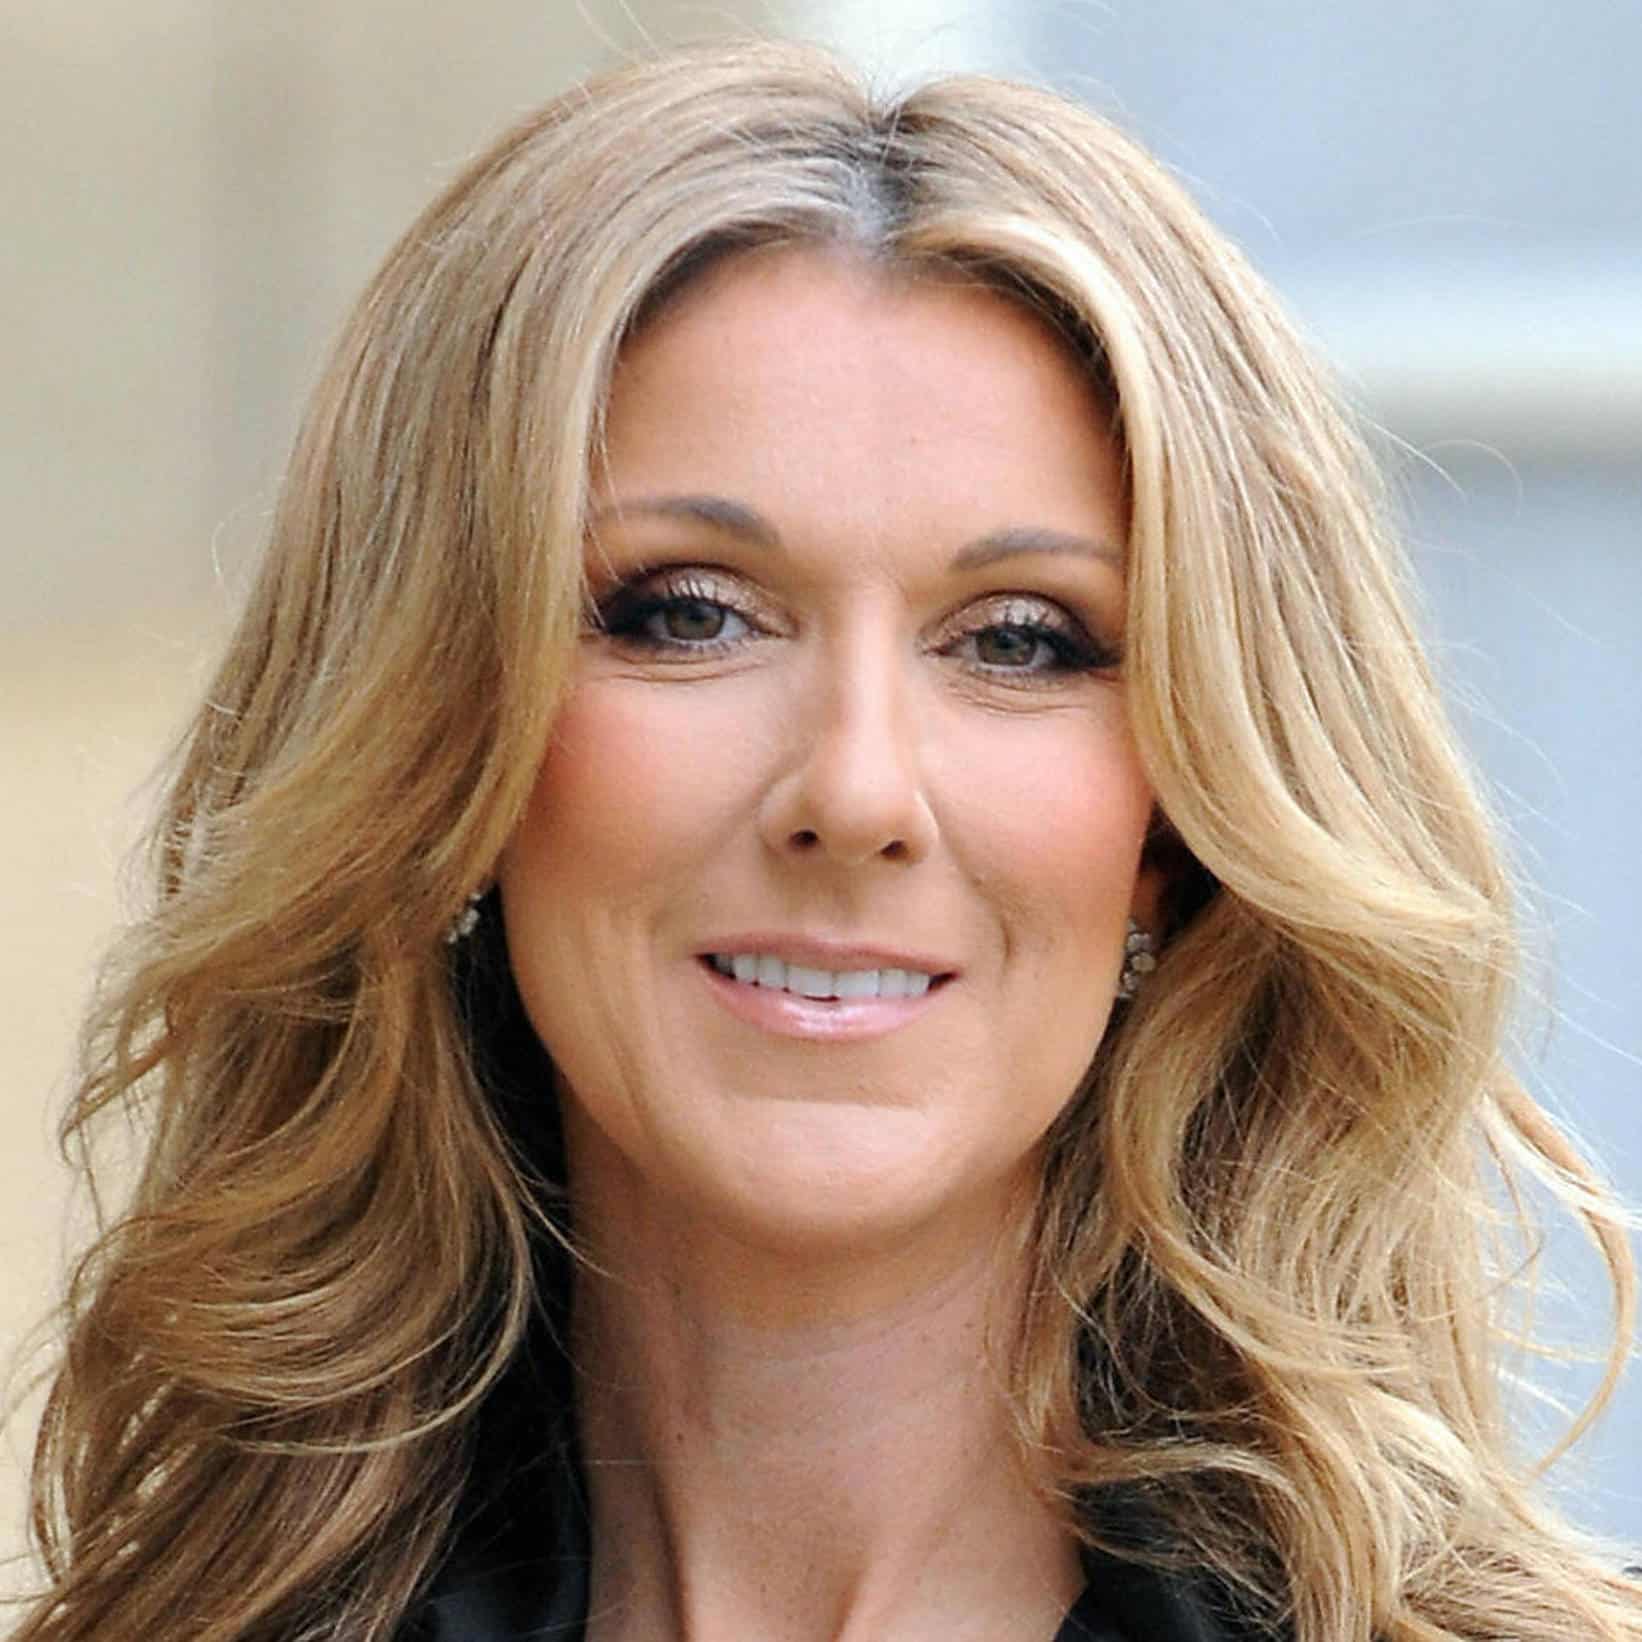 What’s Happened To Celine Dion? Health Update - Biography Tribune